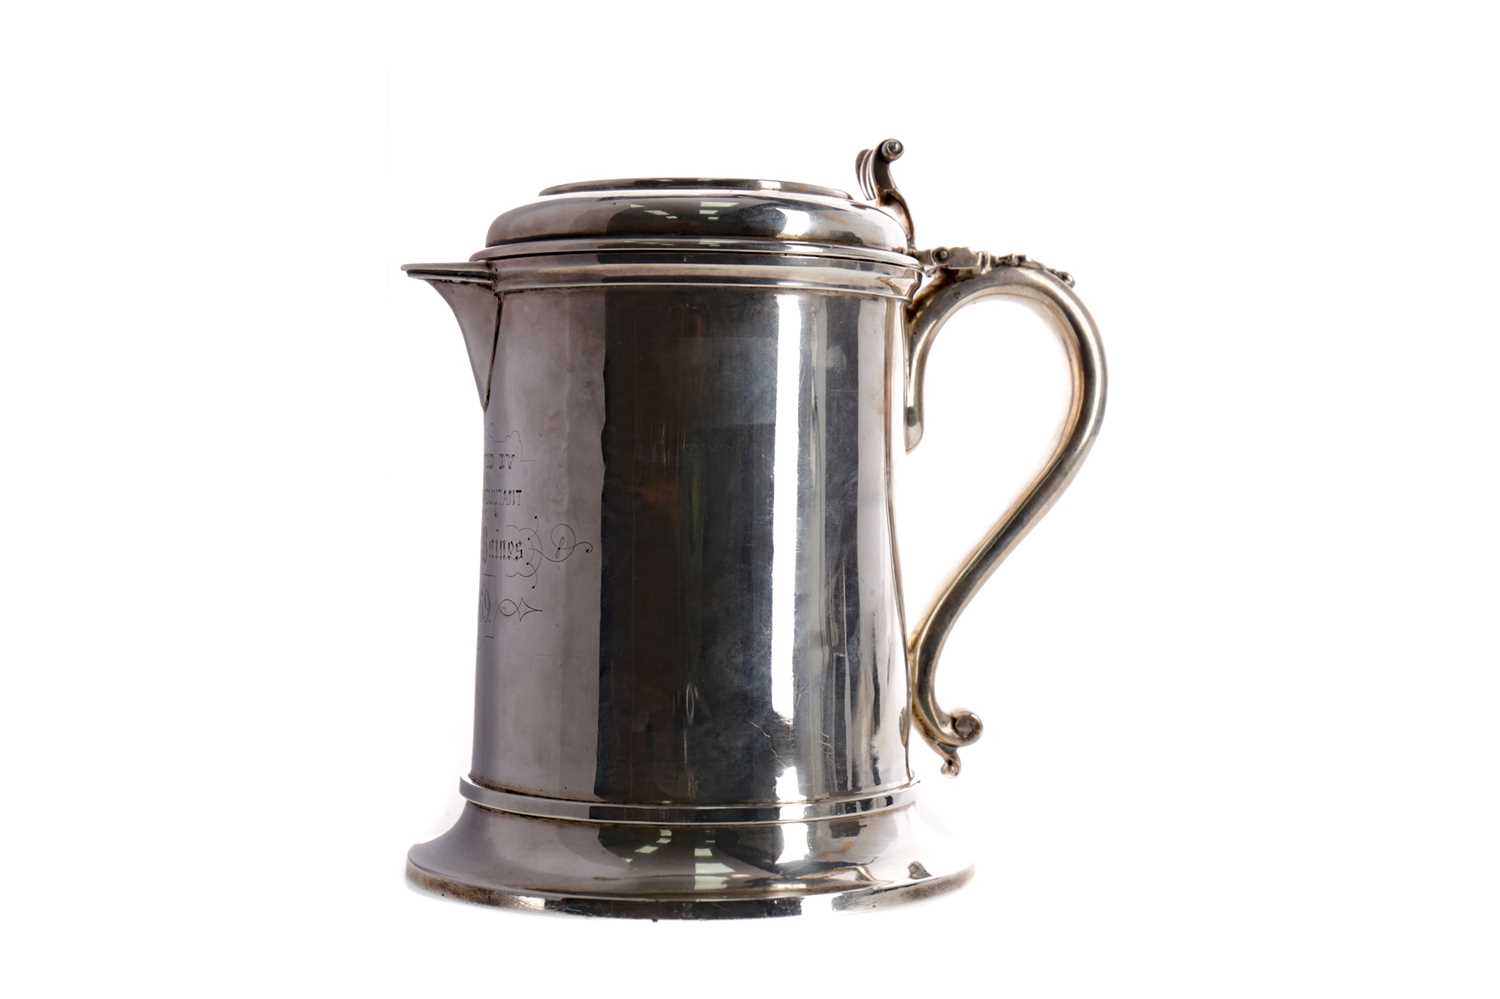 Lot 494 - MILITARY INTEREST - A VICTORIAN SILVER FLAGON WITH PRESENTATION INSCRIPTION